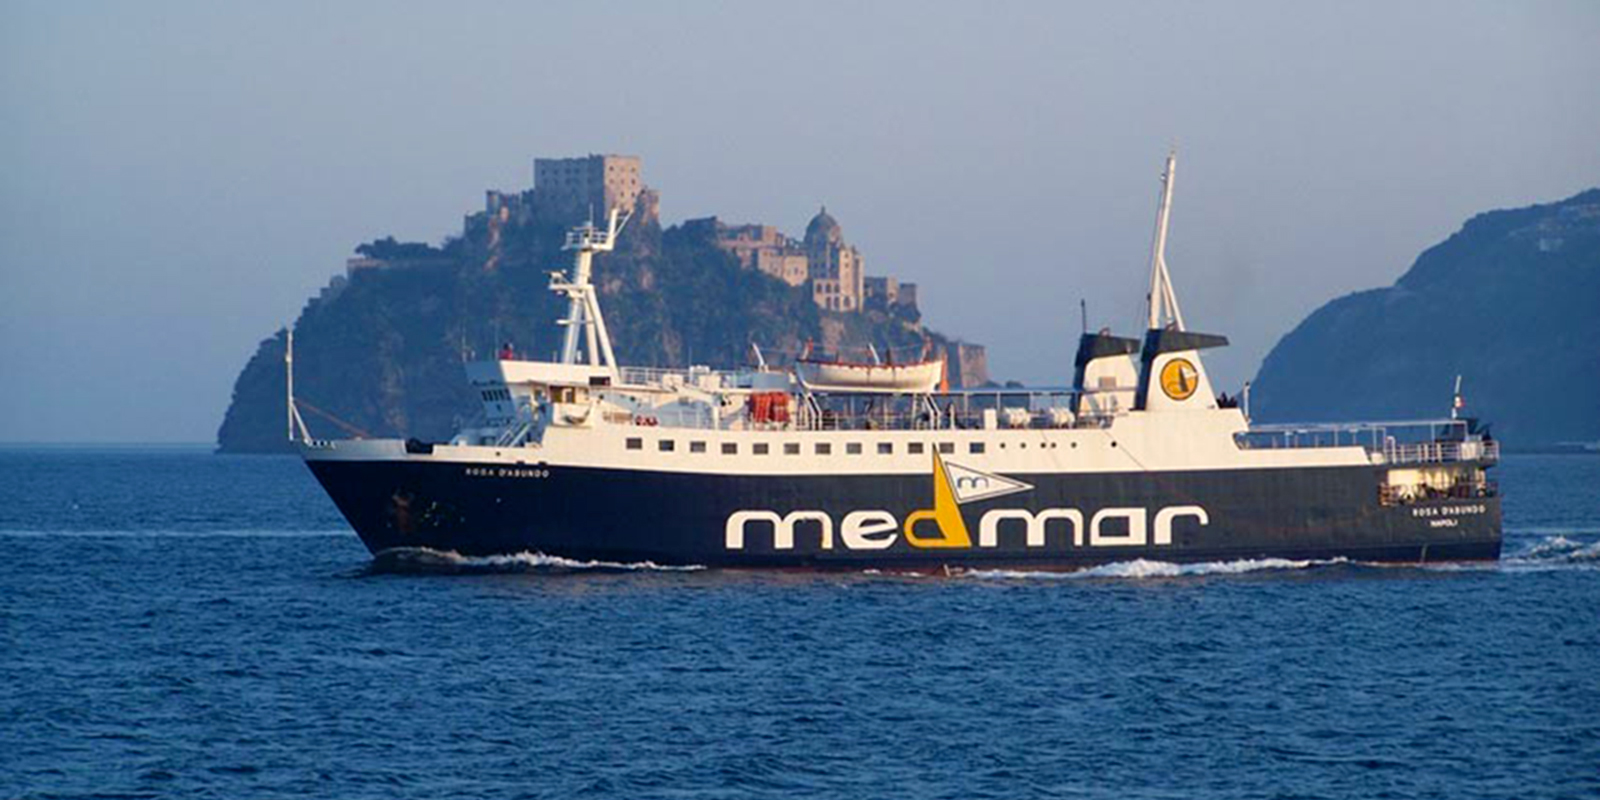 Medmar - Maritime connections to the island of Ischia